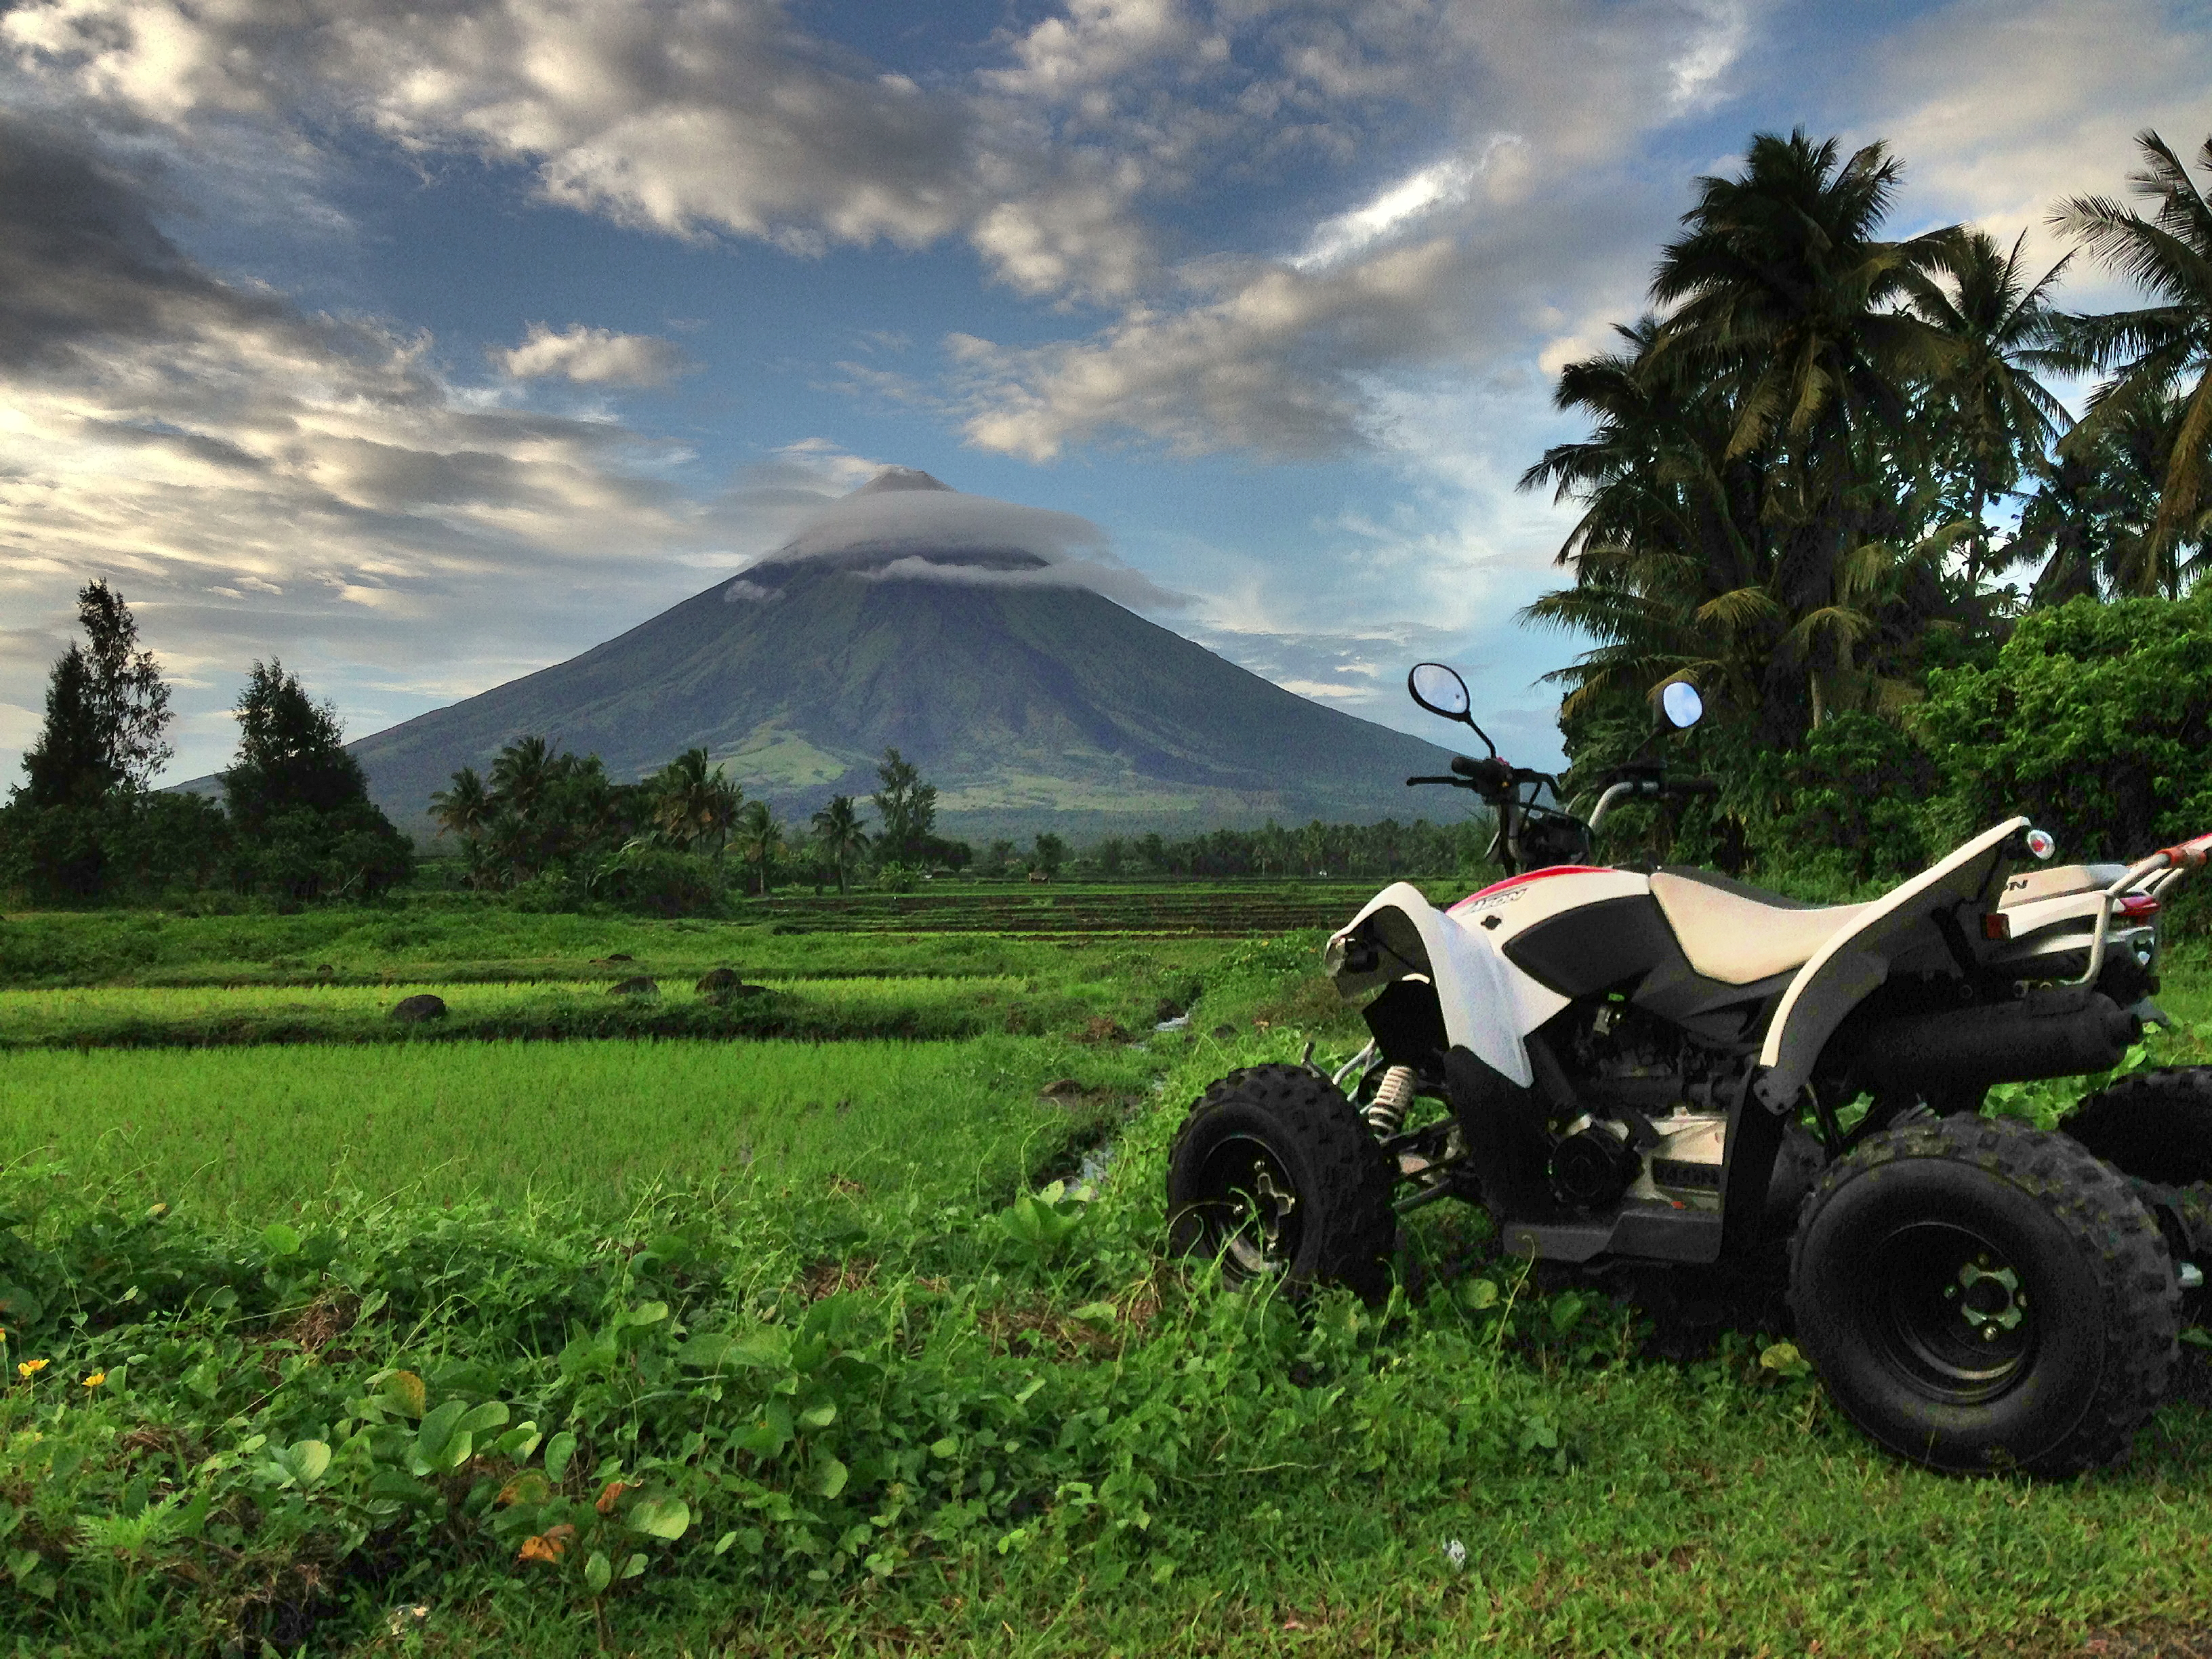 Rates and Details - Mayon ATV tour